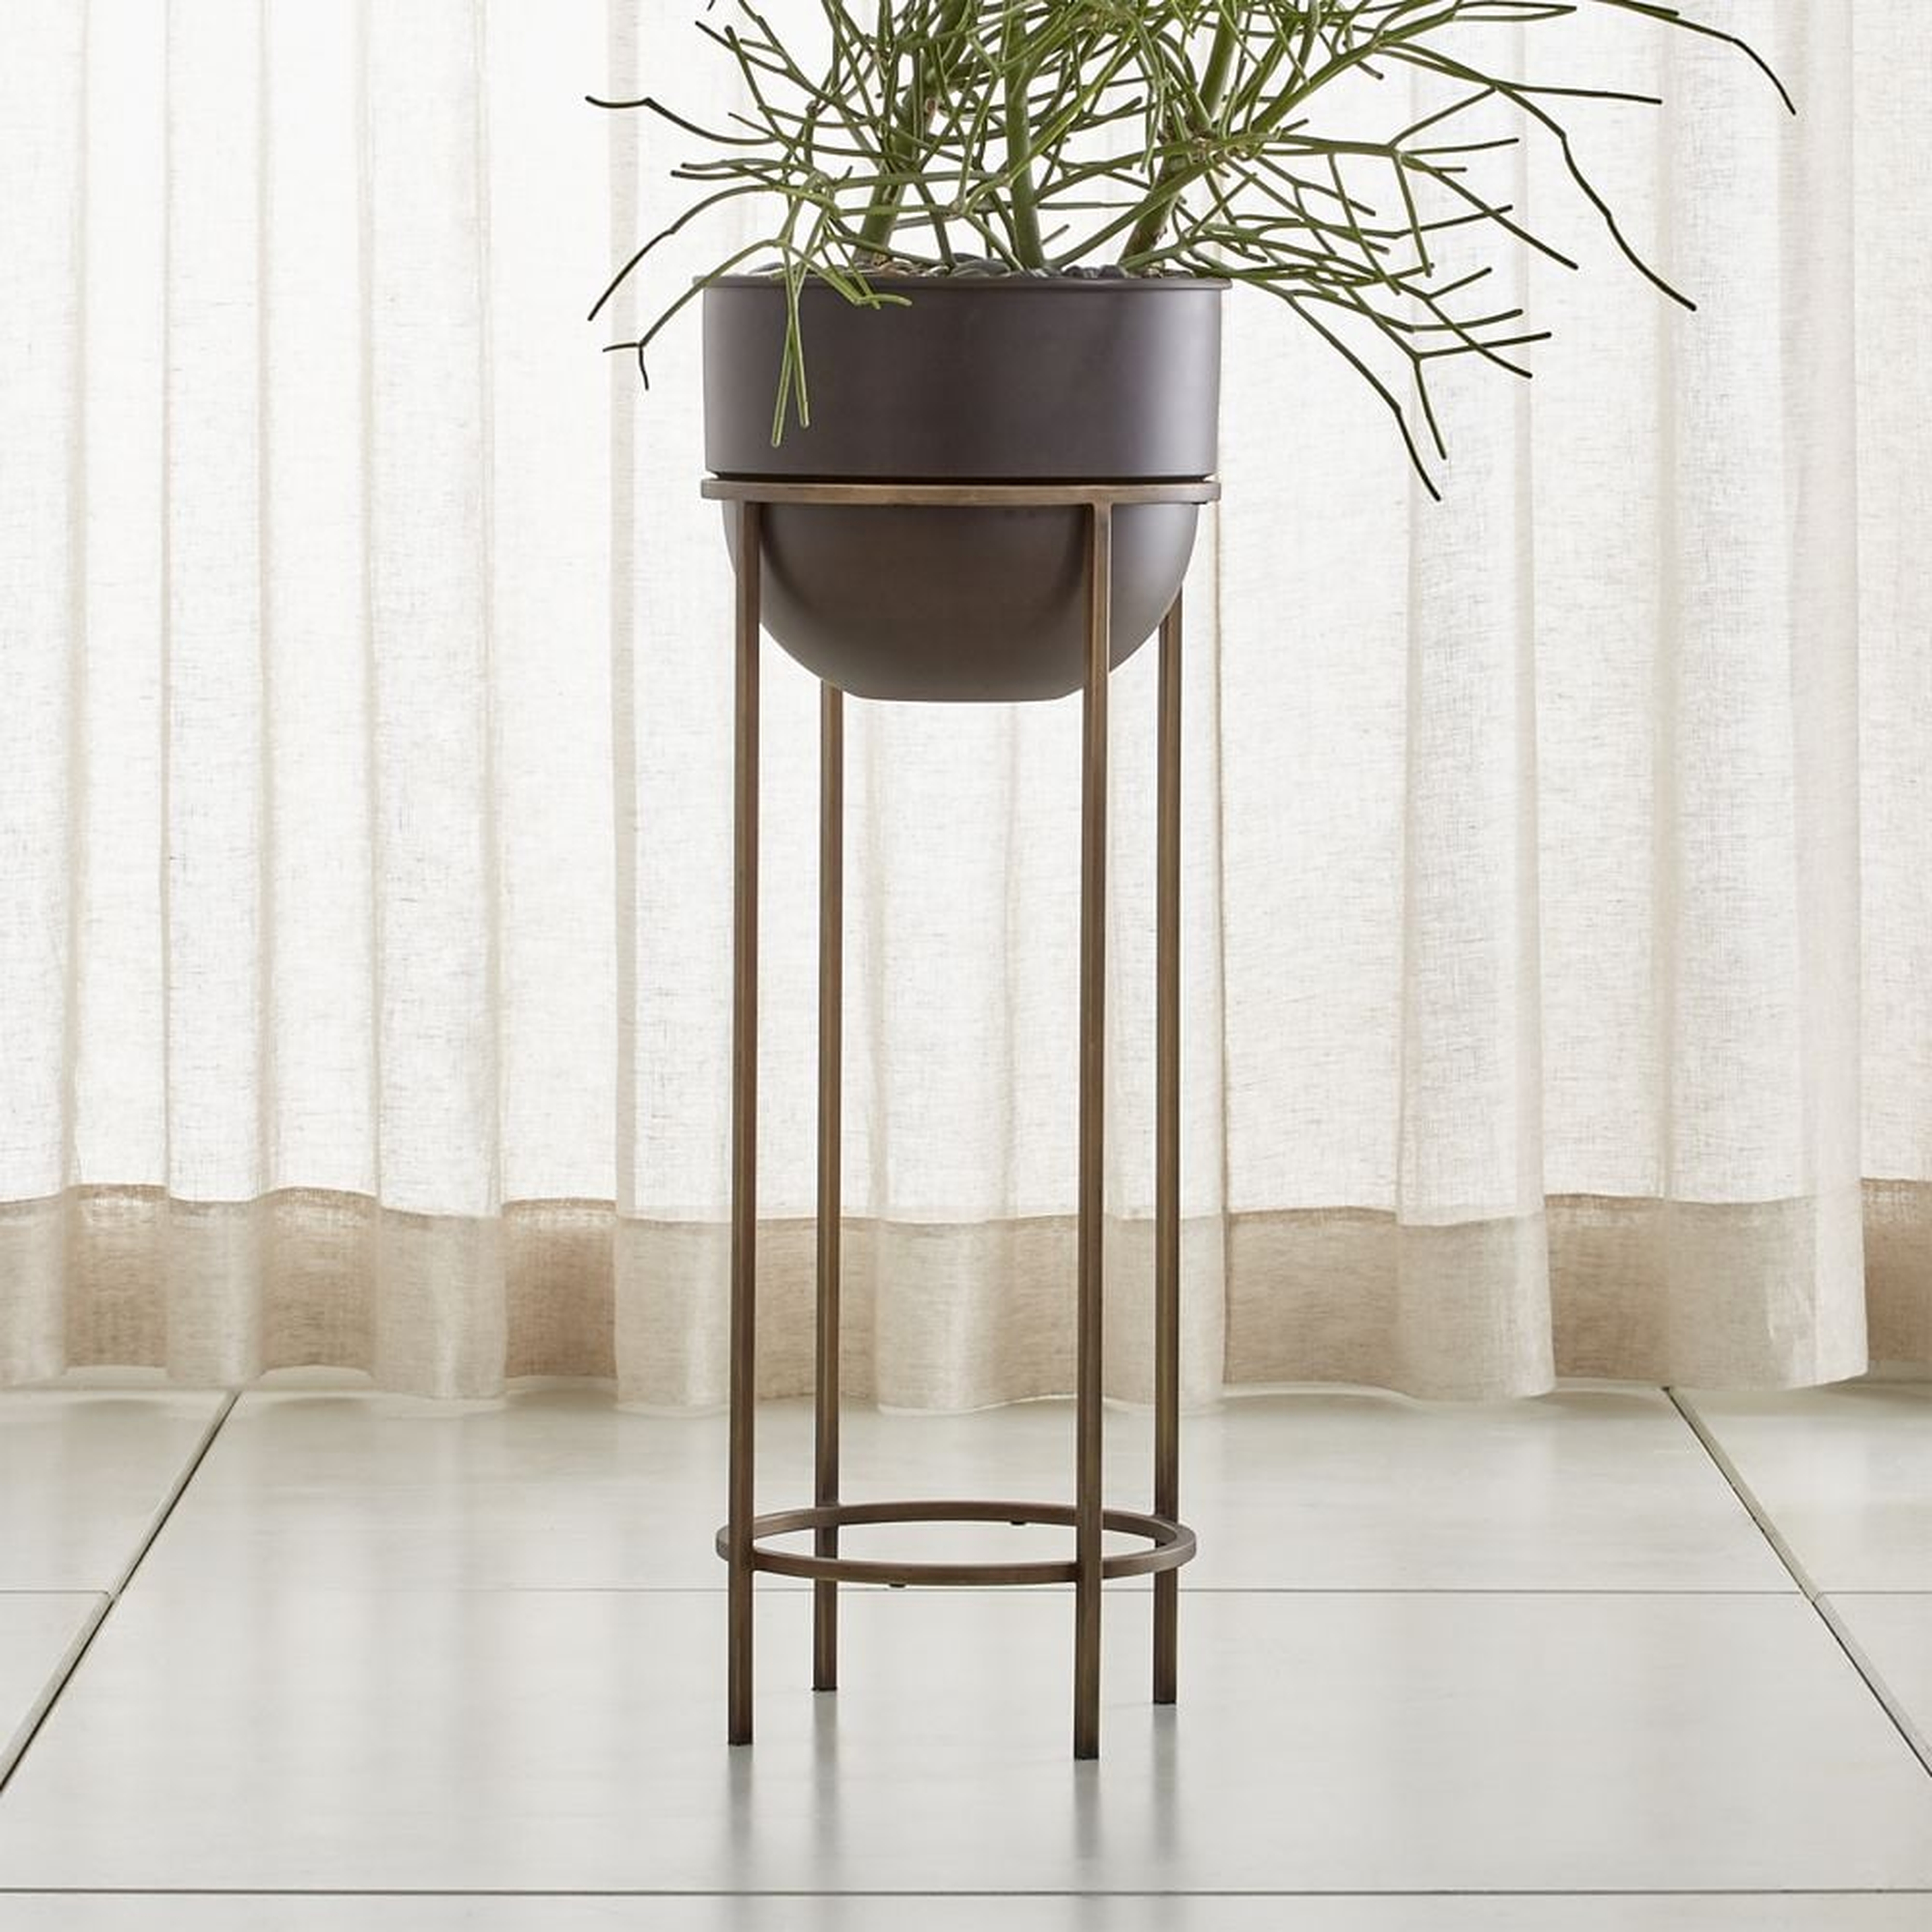 Wesley Large Metal Plant Stand - Crate and Barrel